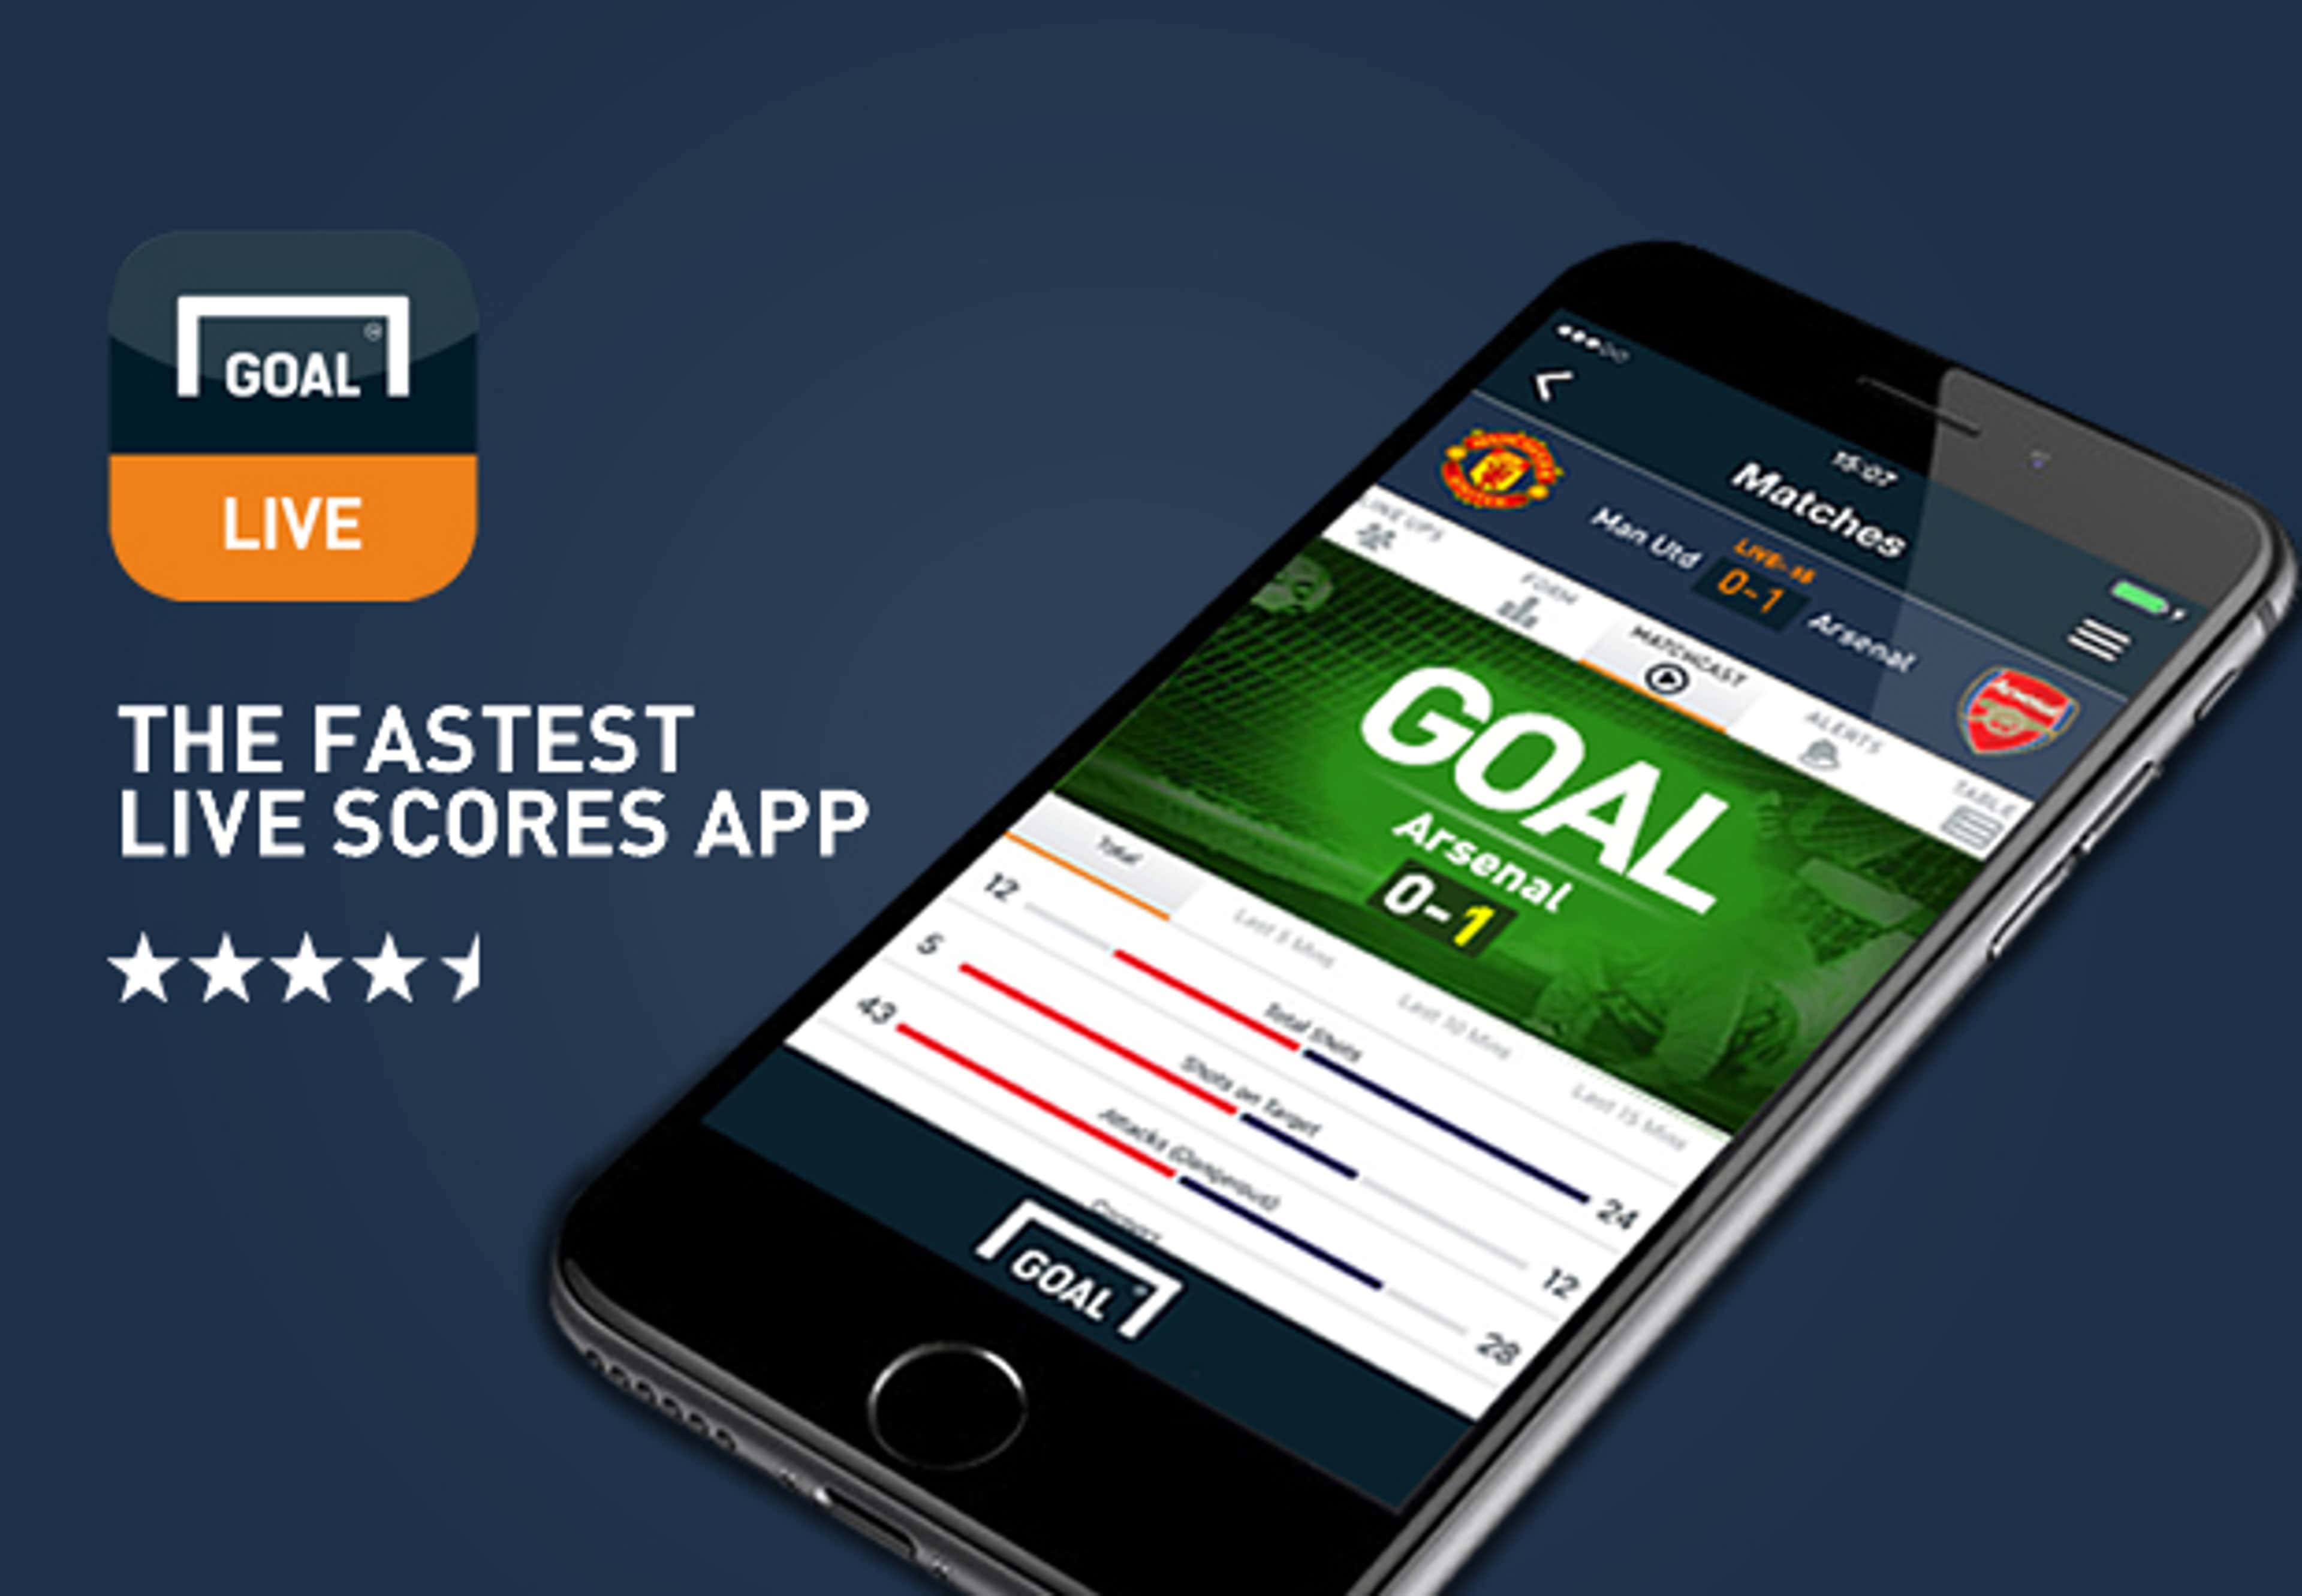 NEW! THE ULTIMATE APP FOR LIVE SCORES! | Goal.com English Bahrain